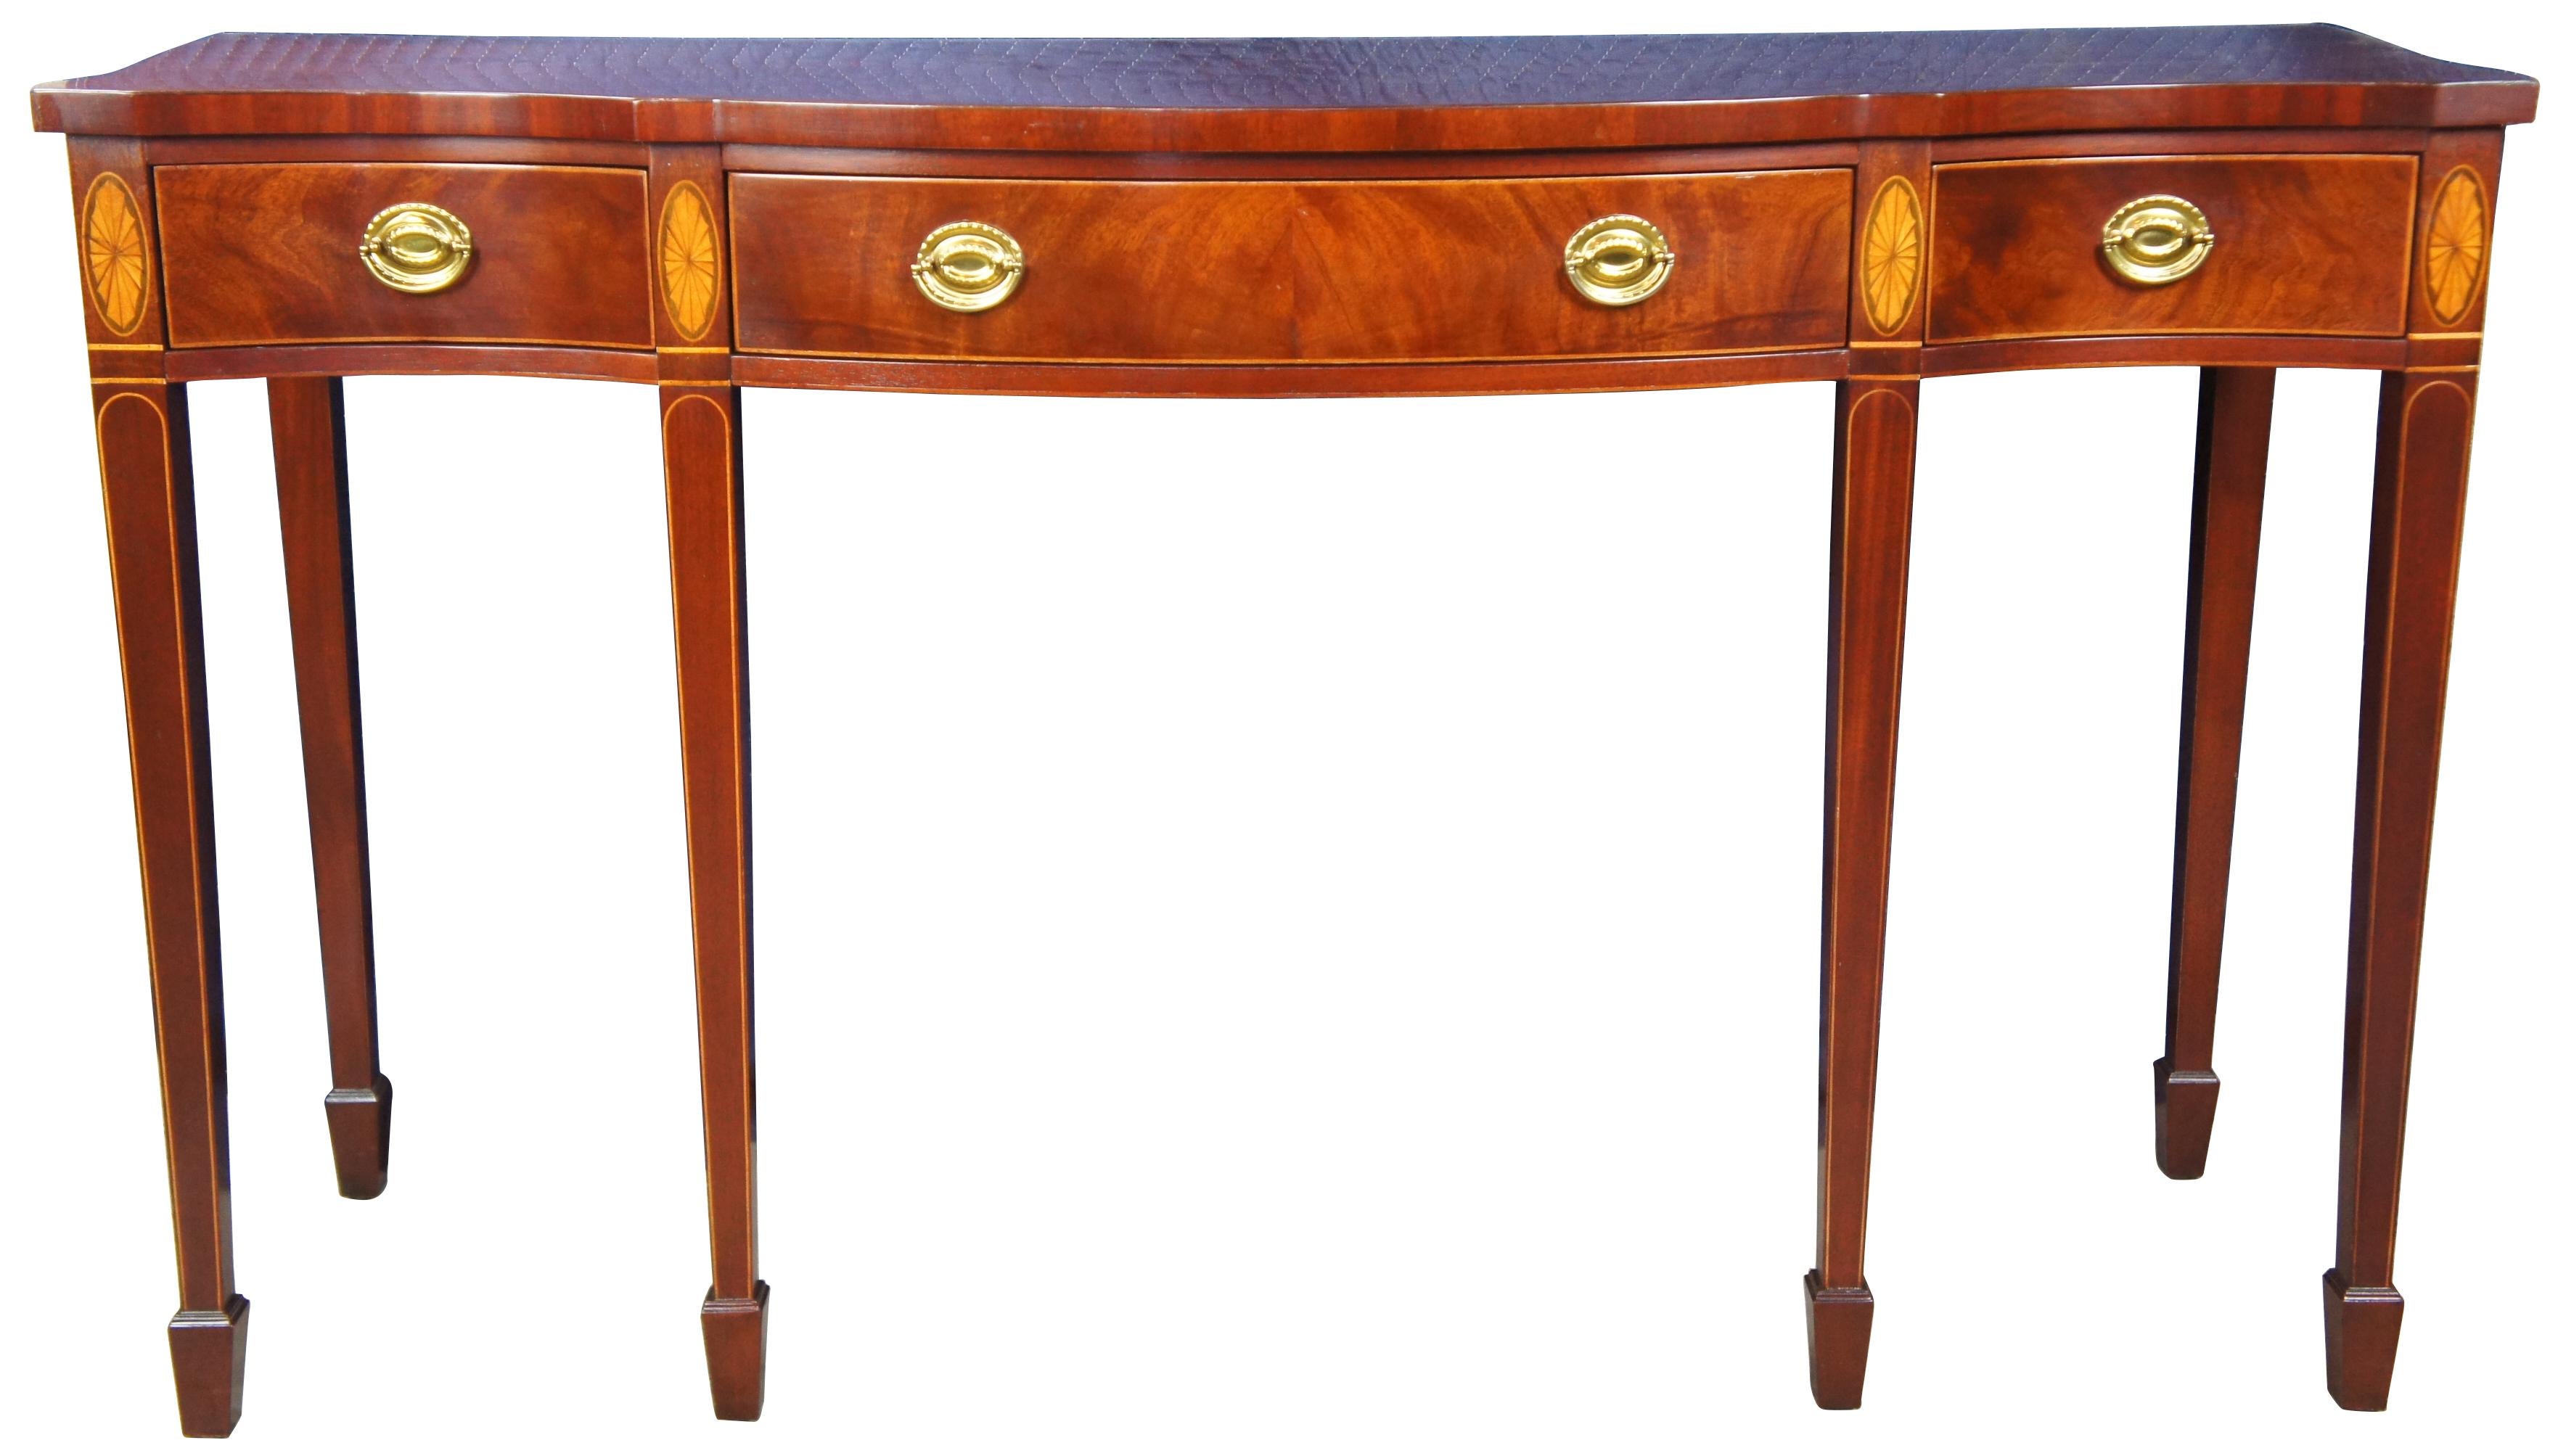 Baker Historic Charleston three-drawer mahogany console table, circa 1990s. Features a mixture of Federal and Sheraton styling with a serpentine front leading to bookmatched mahogany with satinwood inlay, brass hardware, and long tapered legs